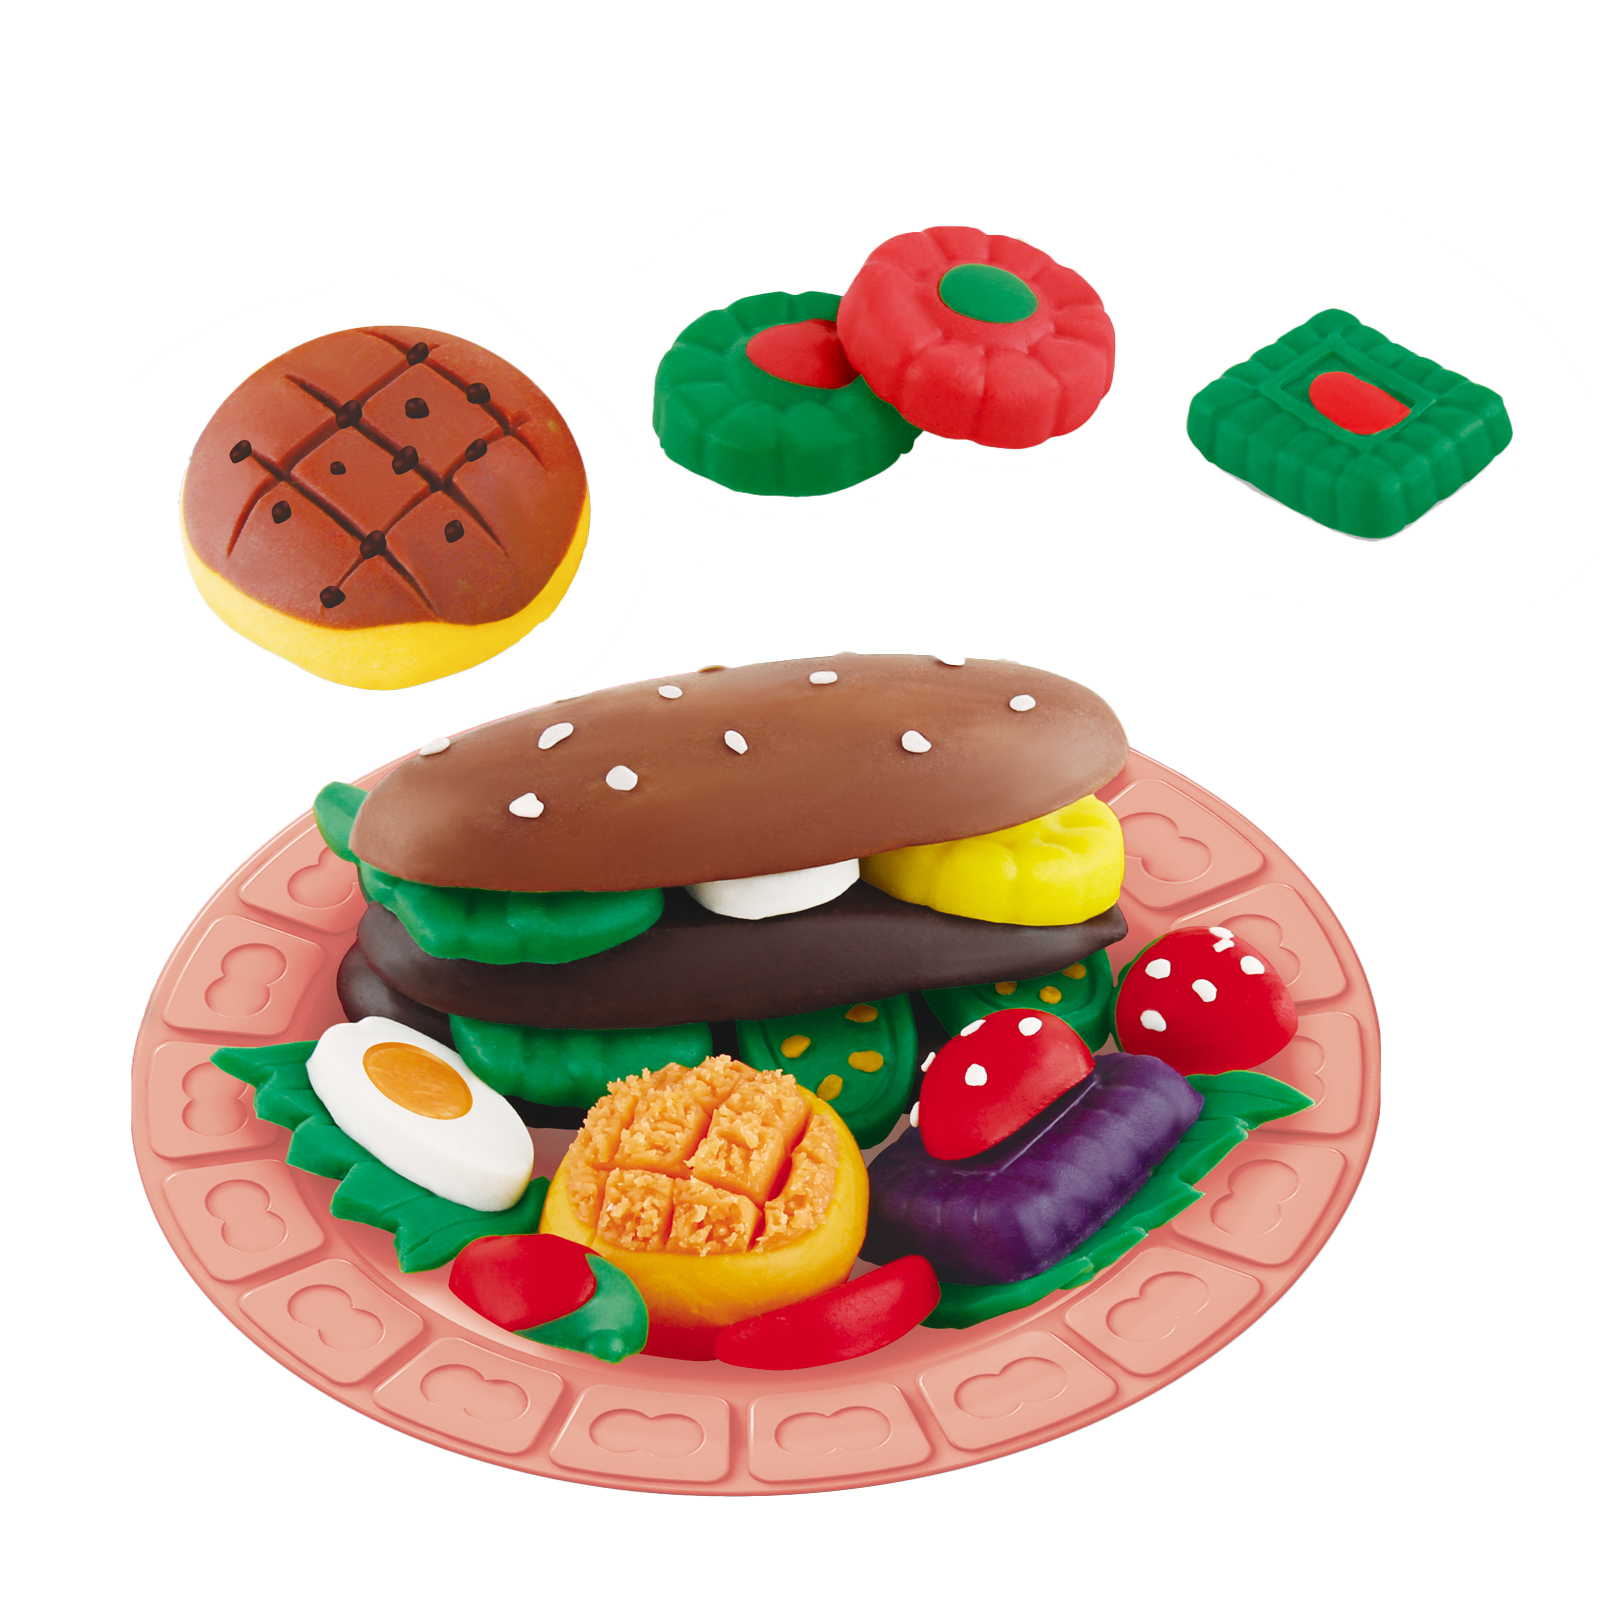 Plasticine modeling clay. Child dough play in school mold from plasticine  in kindergarten. Kids knead modeling clay with hands in preschool.  Preparation for exhibition of crafts made of plasticine. Stock Photo